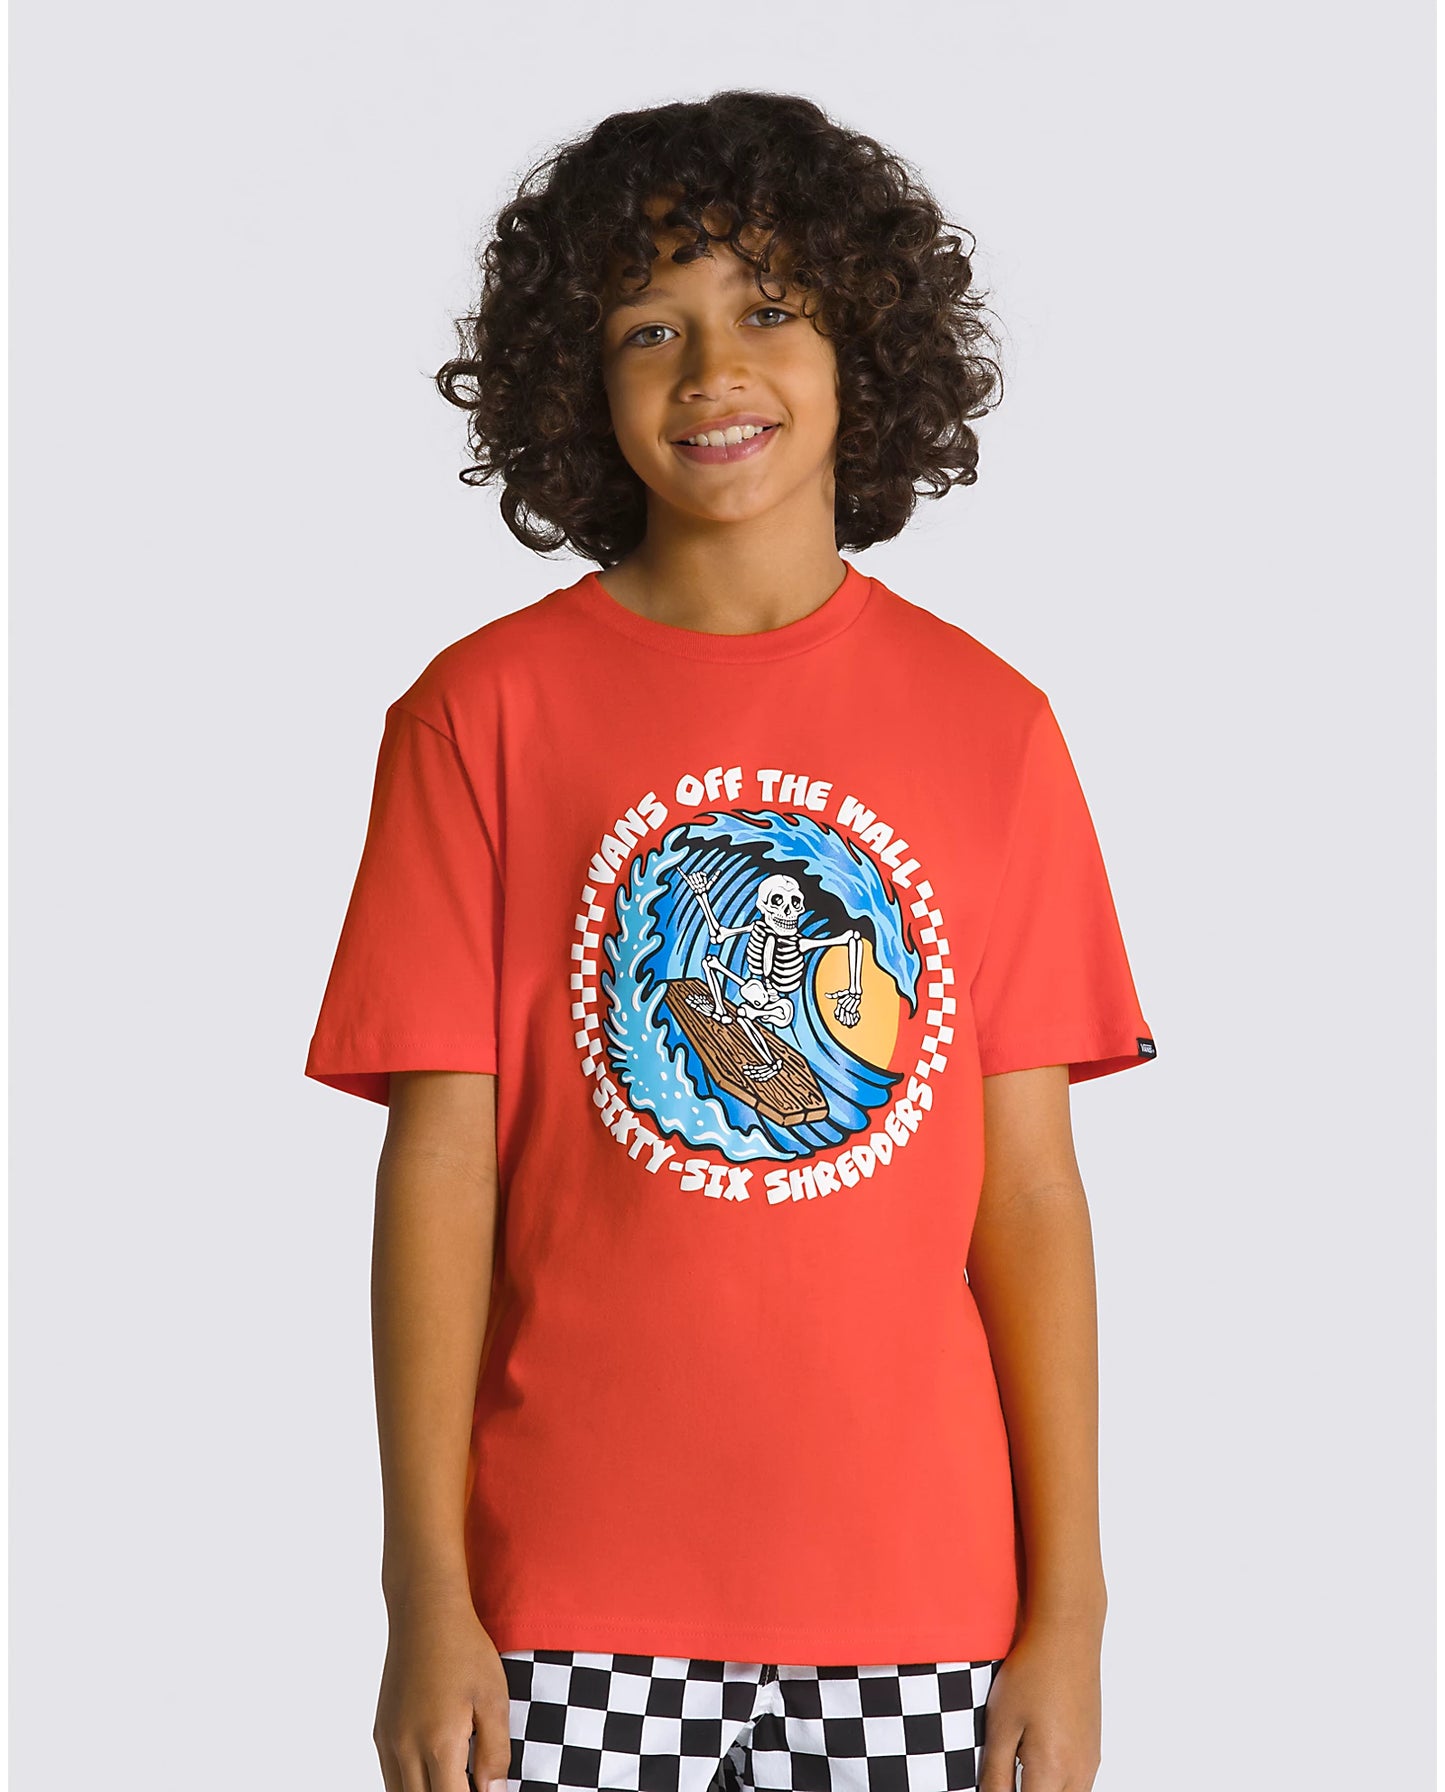 Kids 66 Shredders s/s Tee Shirt Red/Org.com(size options listed)